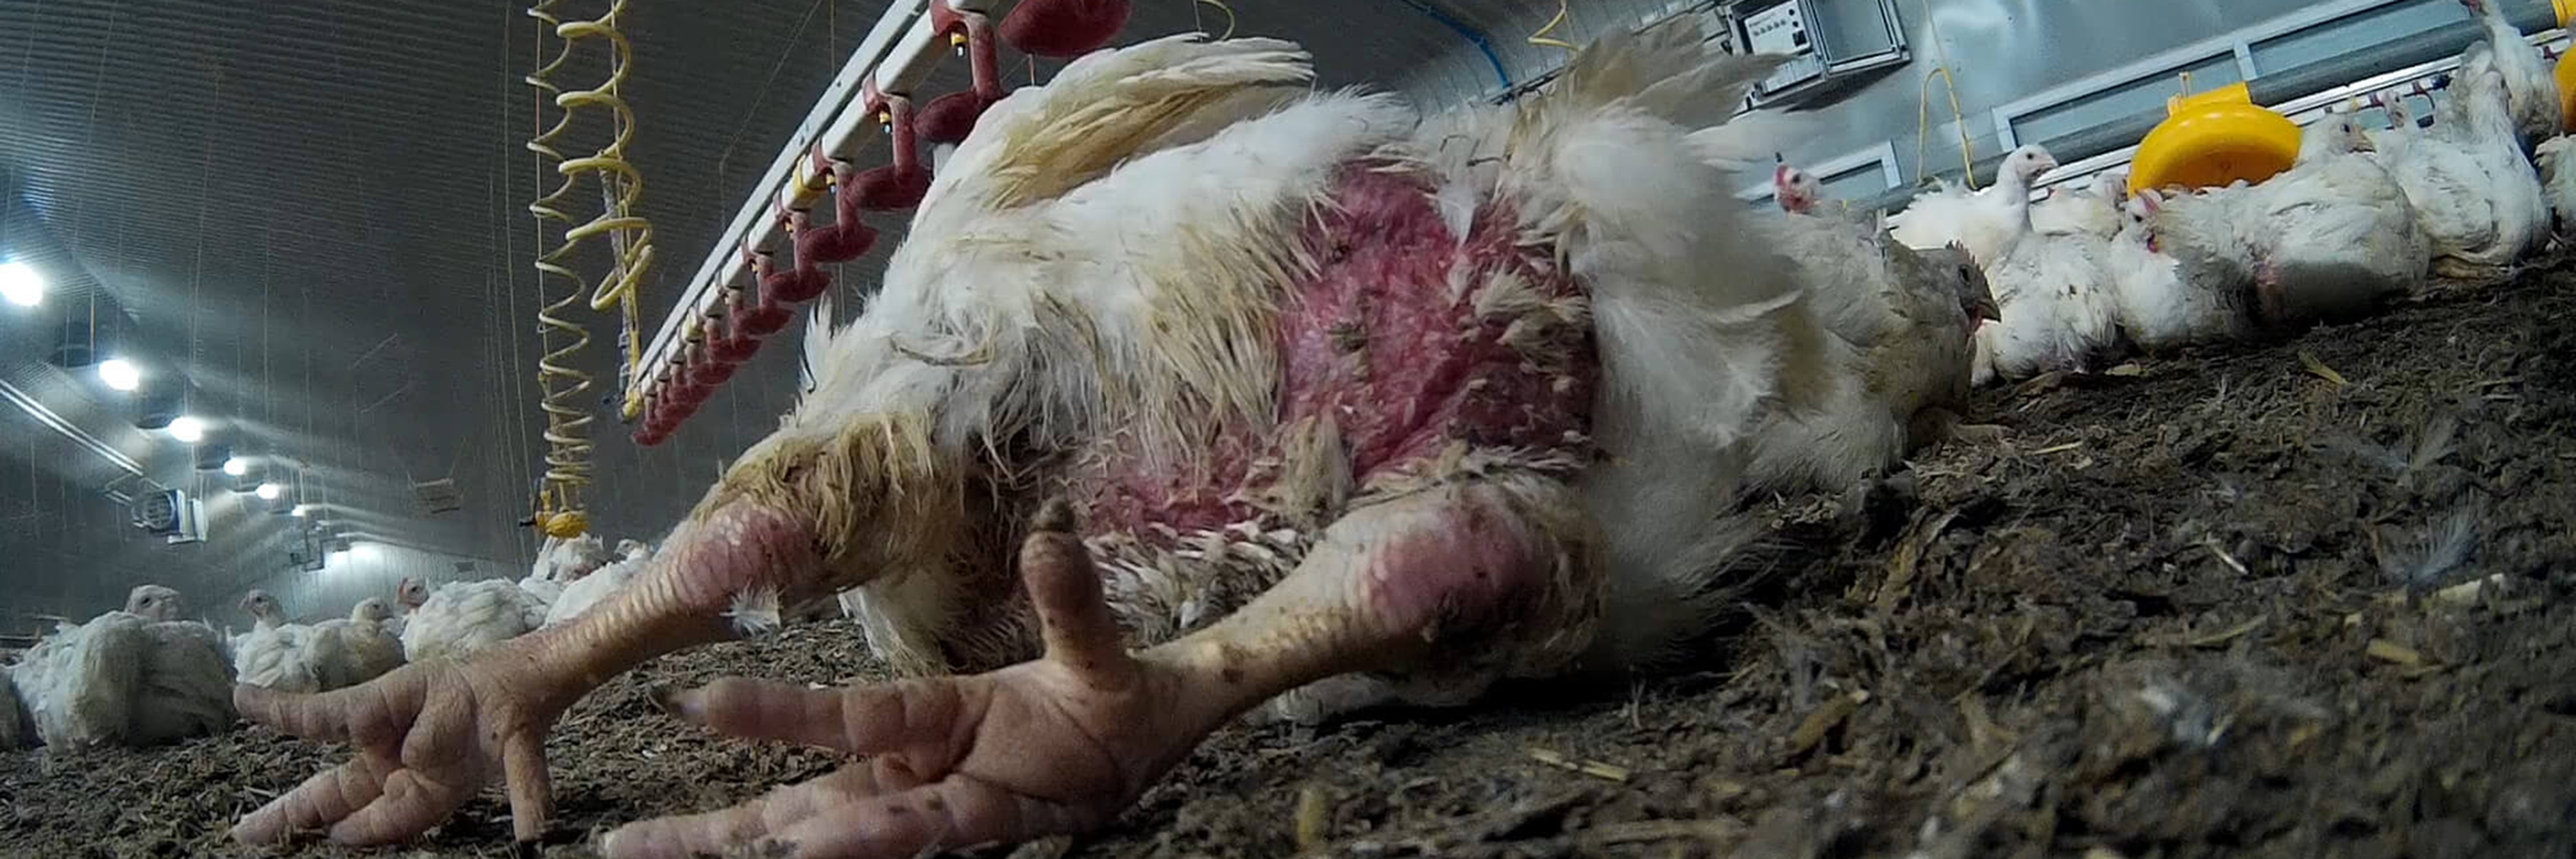 an injured chicken suffering from feather loss and burns on a UK chicken farm